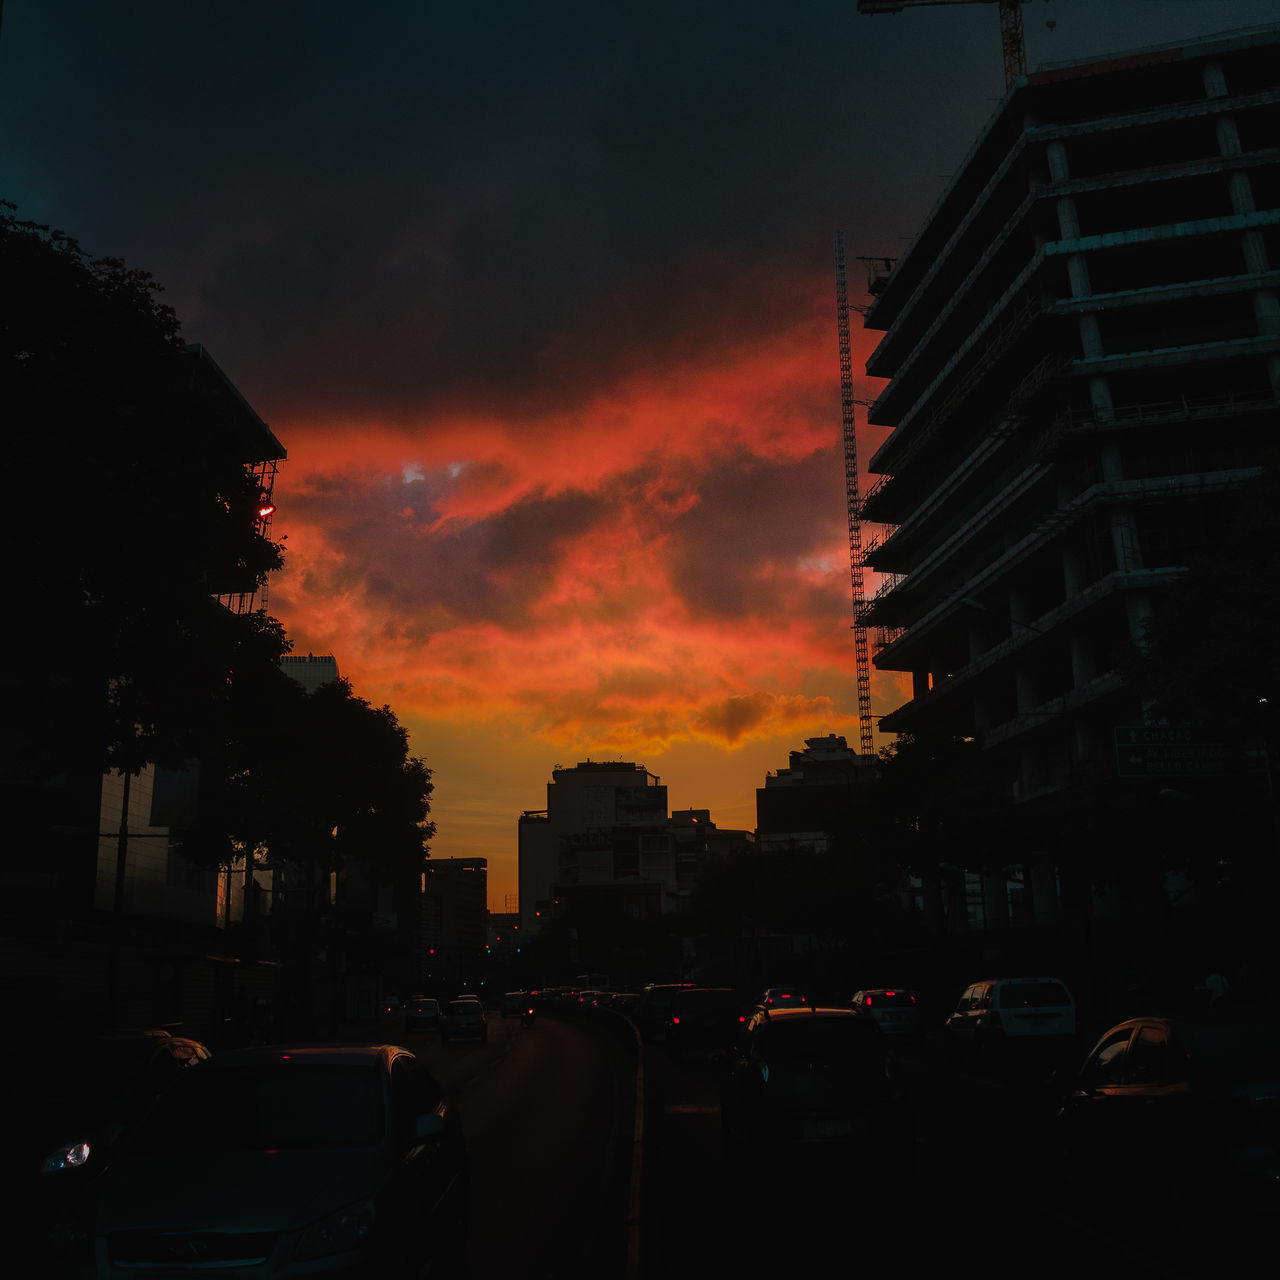 CARS ON STREET AMIDST BUILDINGS AGAINST SKY DURING SUNSET